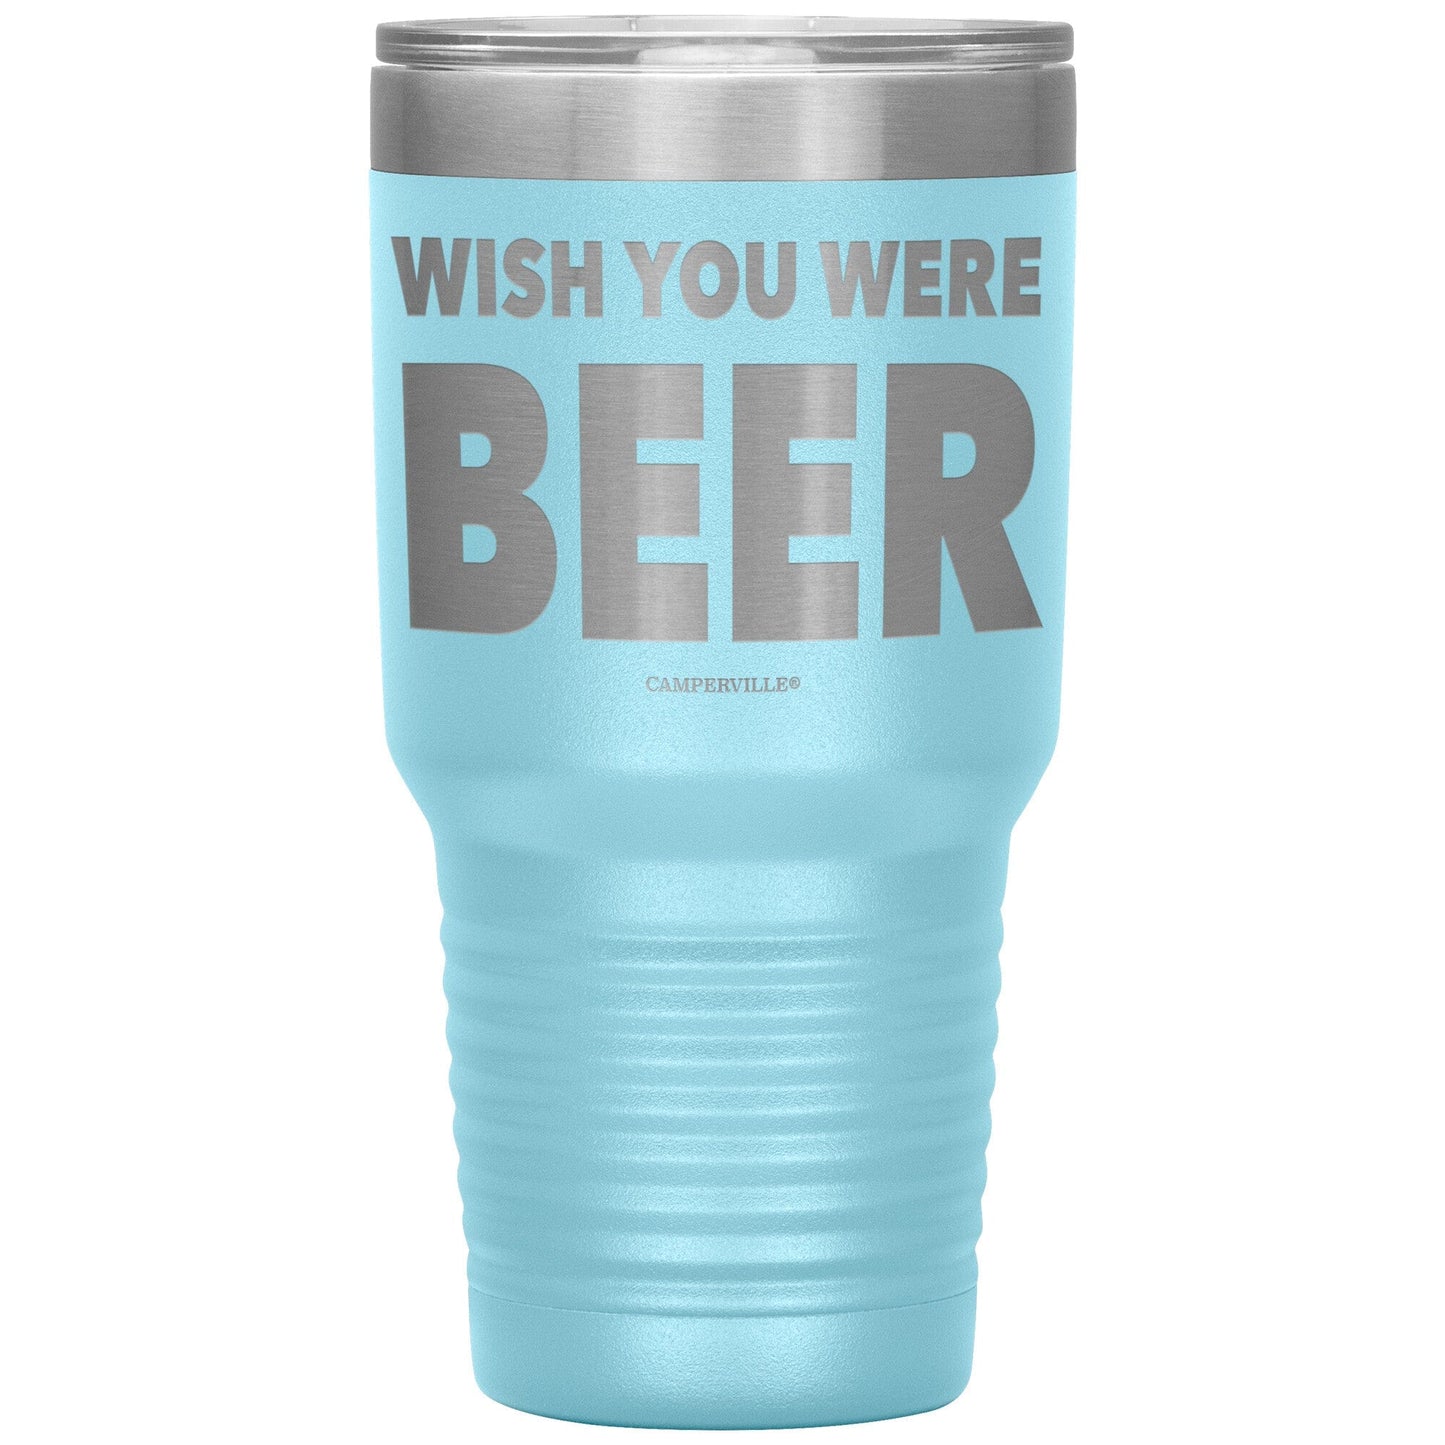 "Wish You Were Beer" - Stainless Steel Tumbler